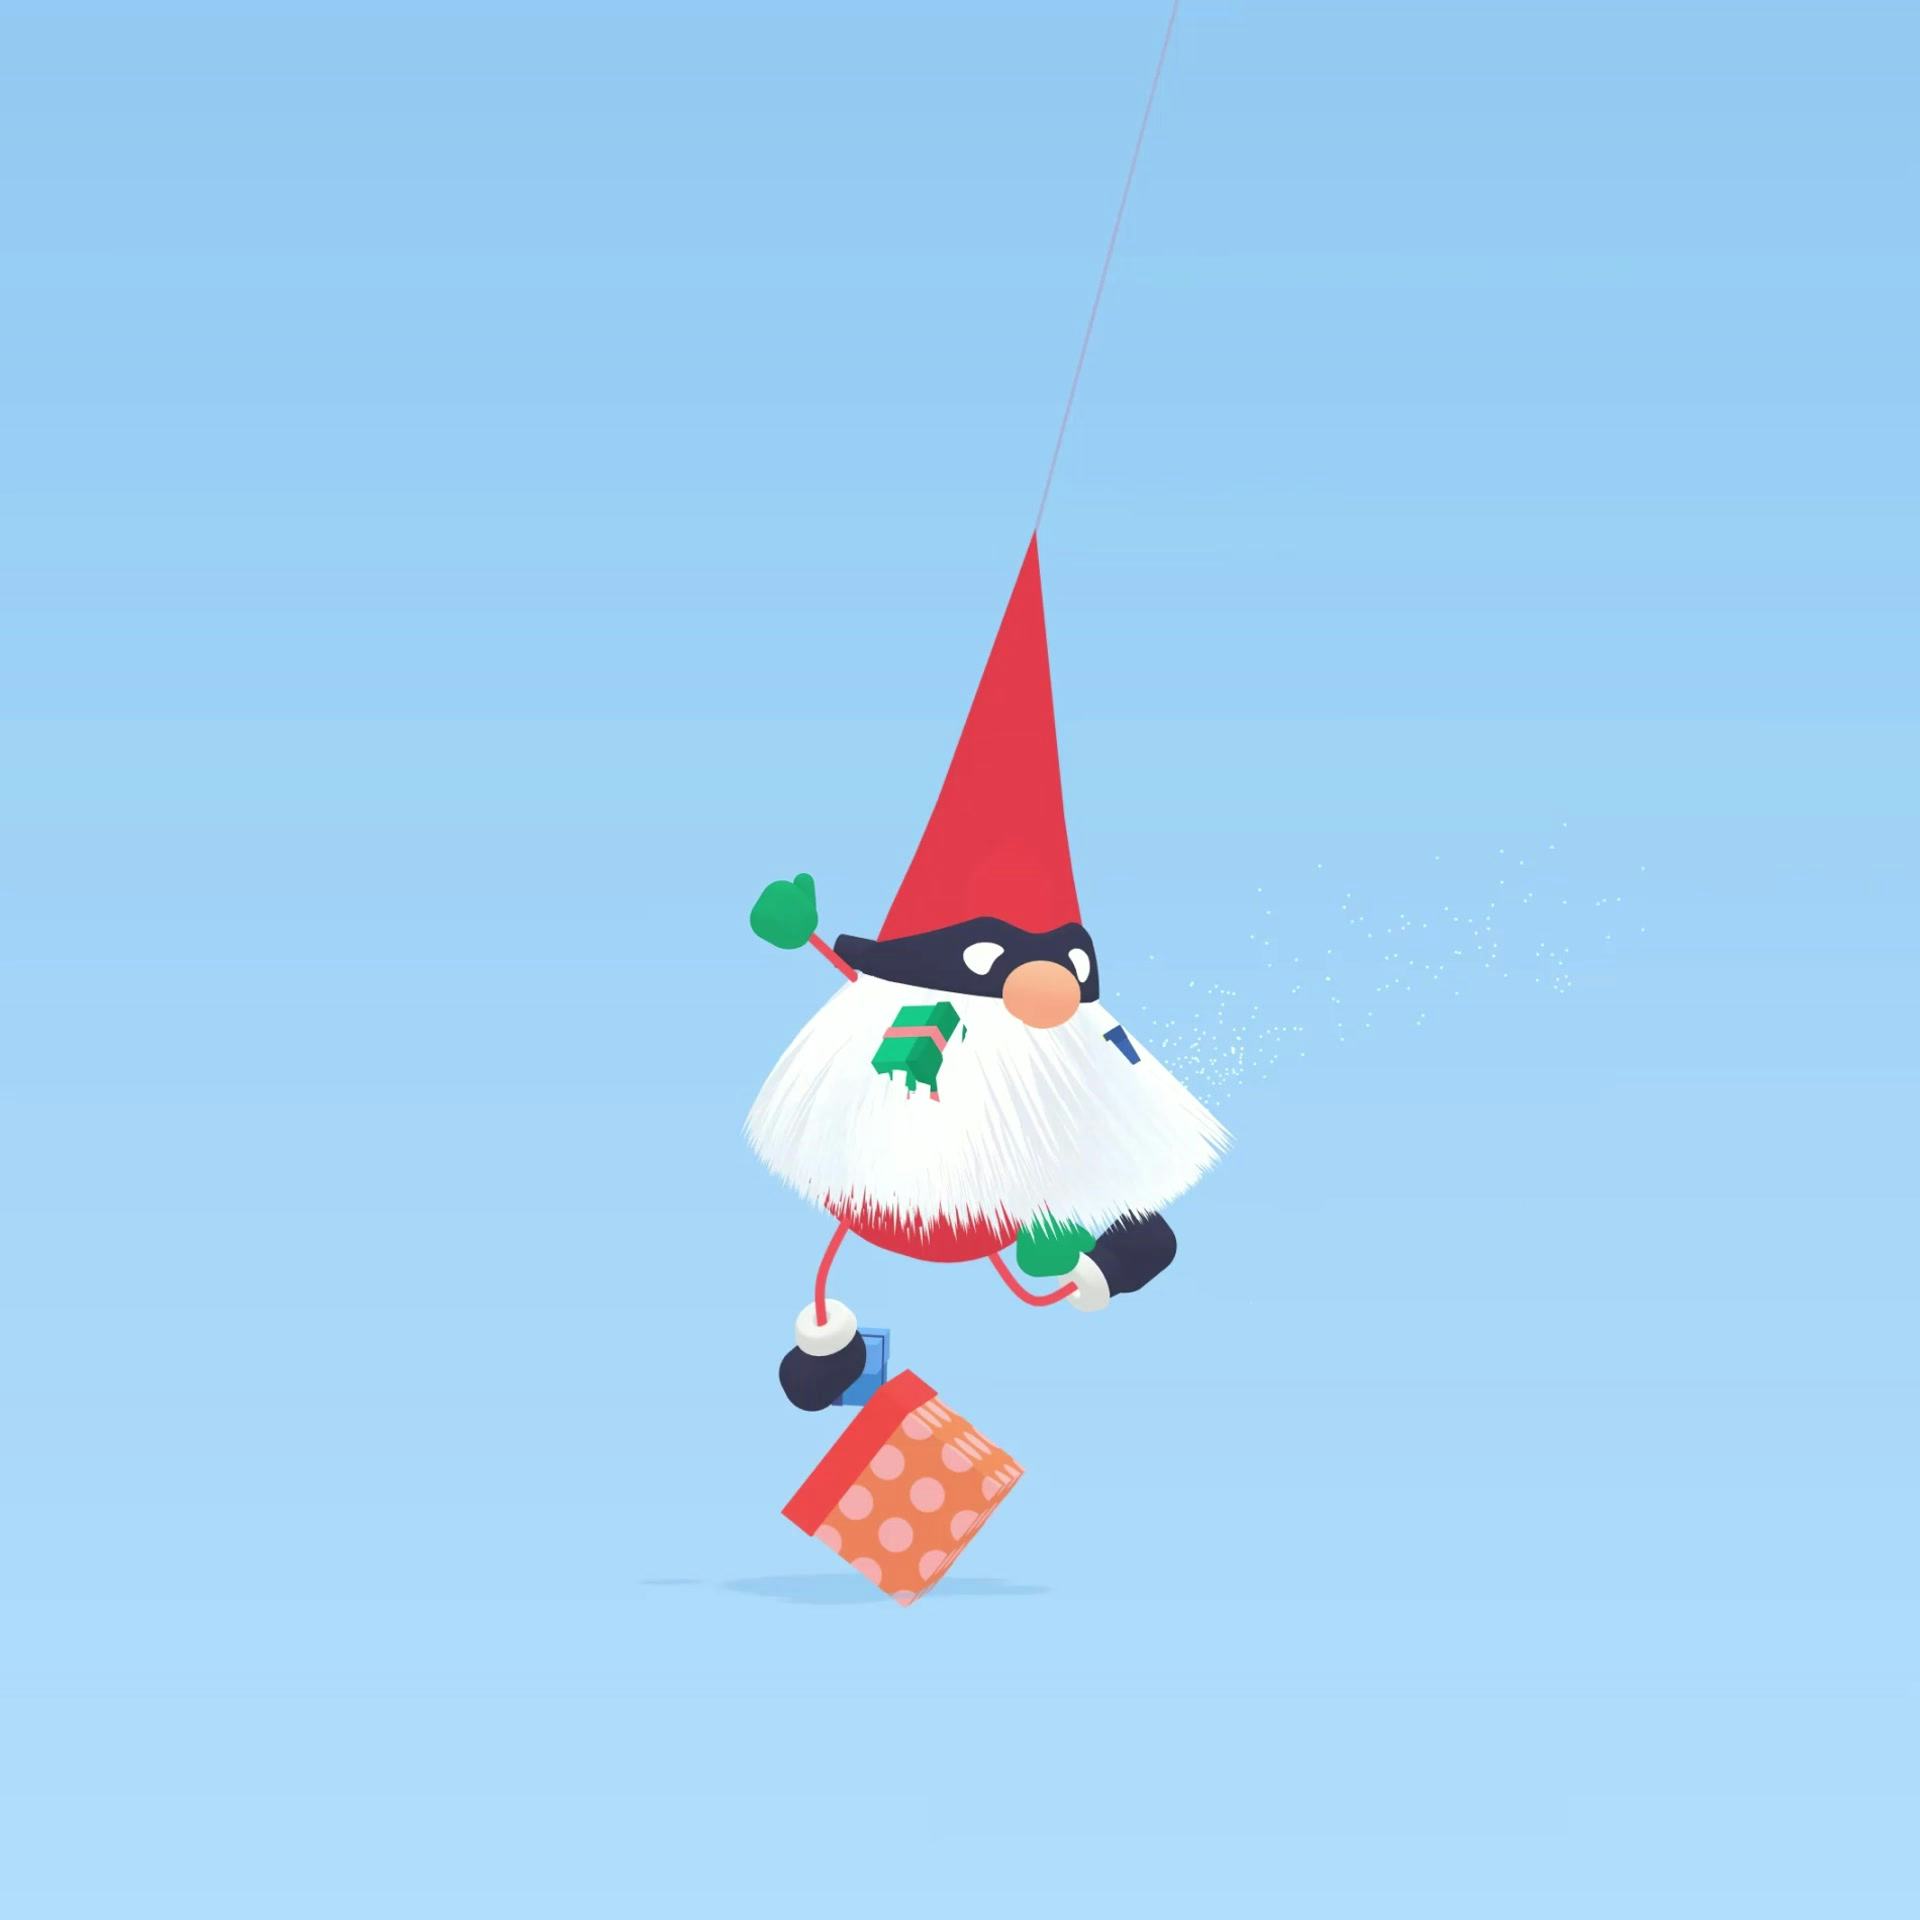 Sneaky Santa game, swinging him makes him drop presents that he stole